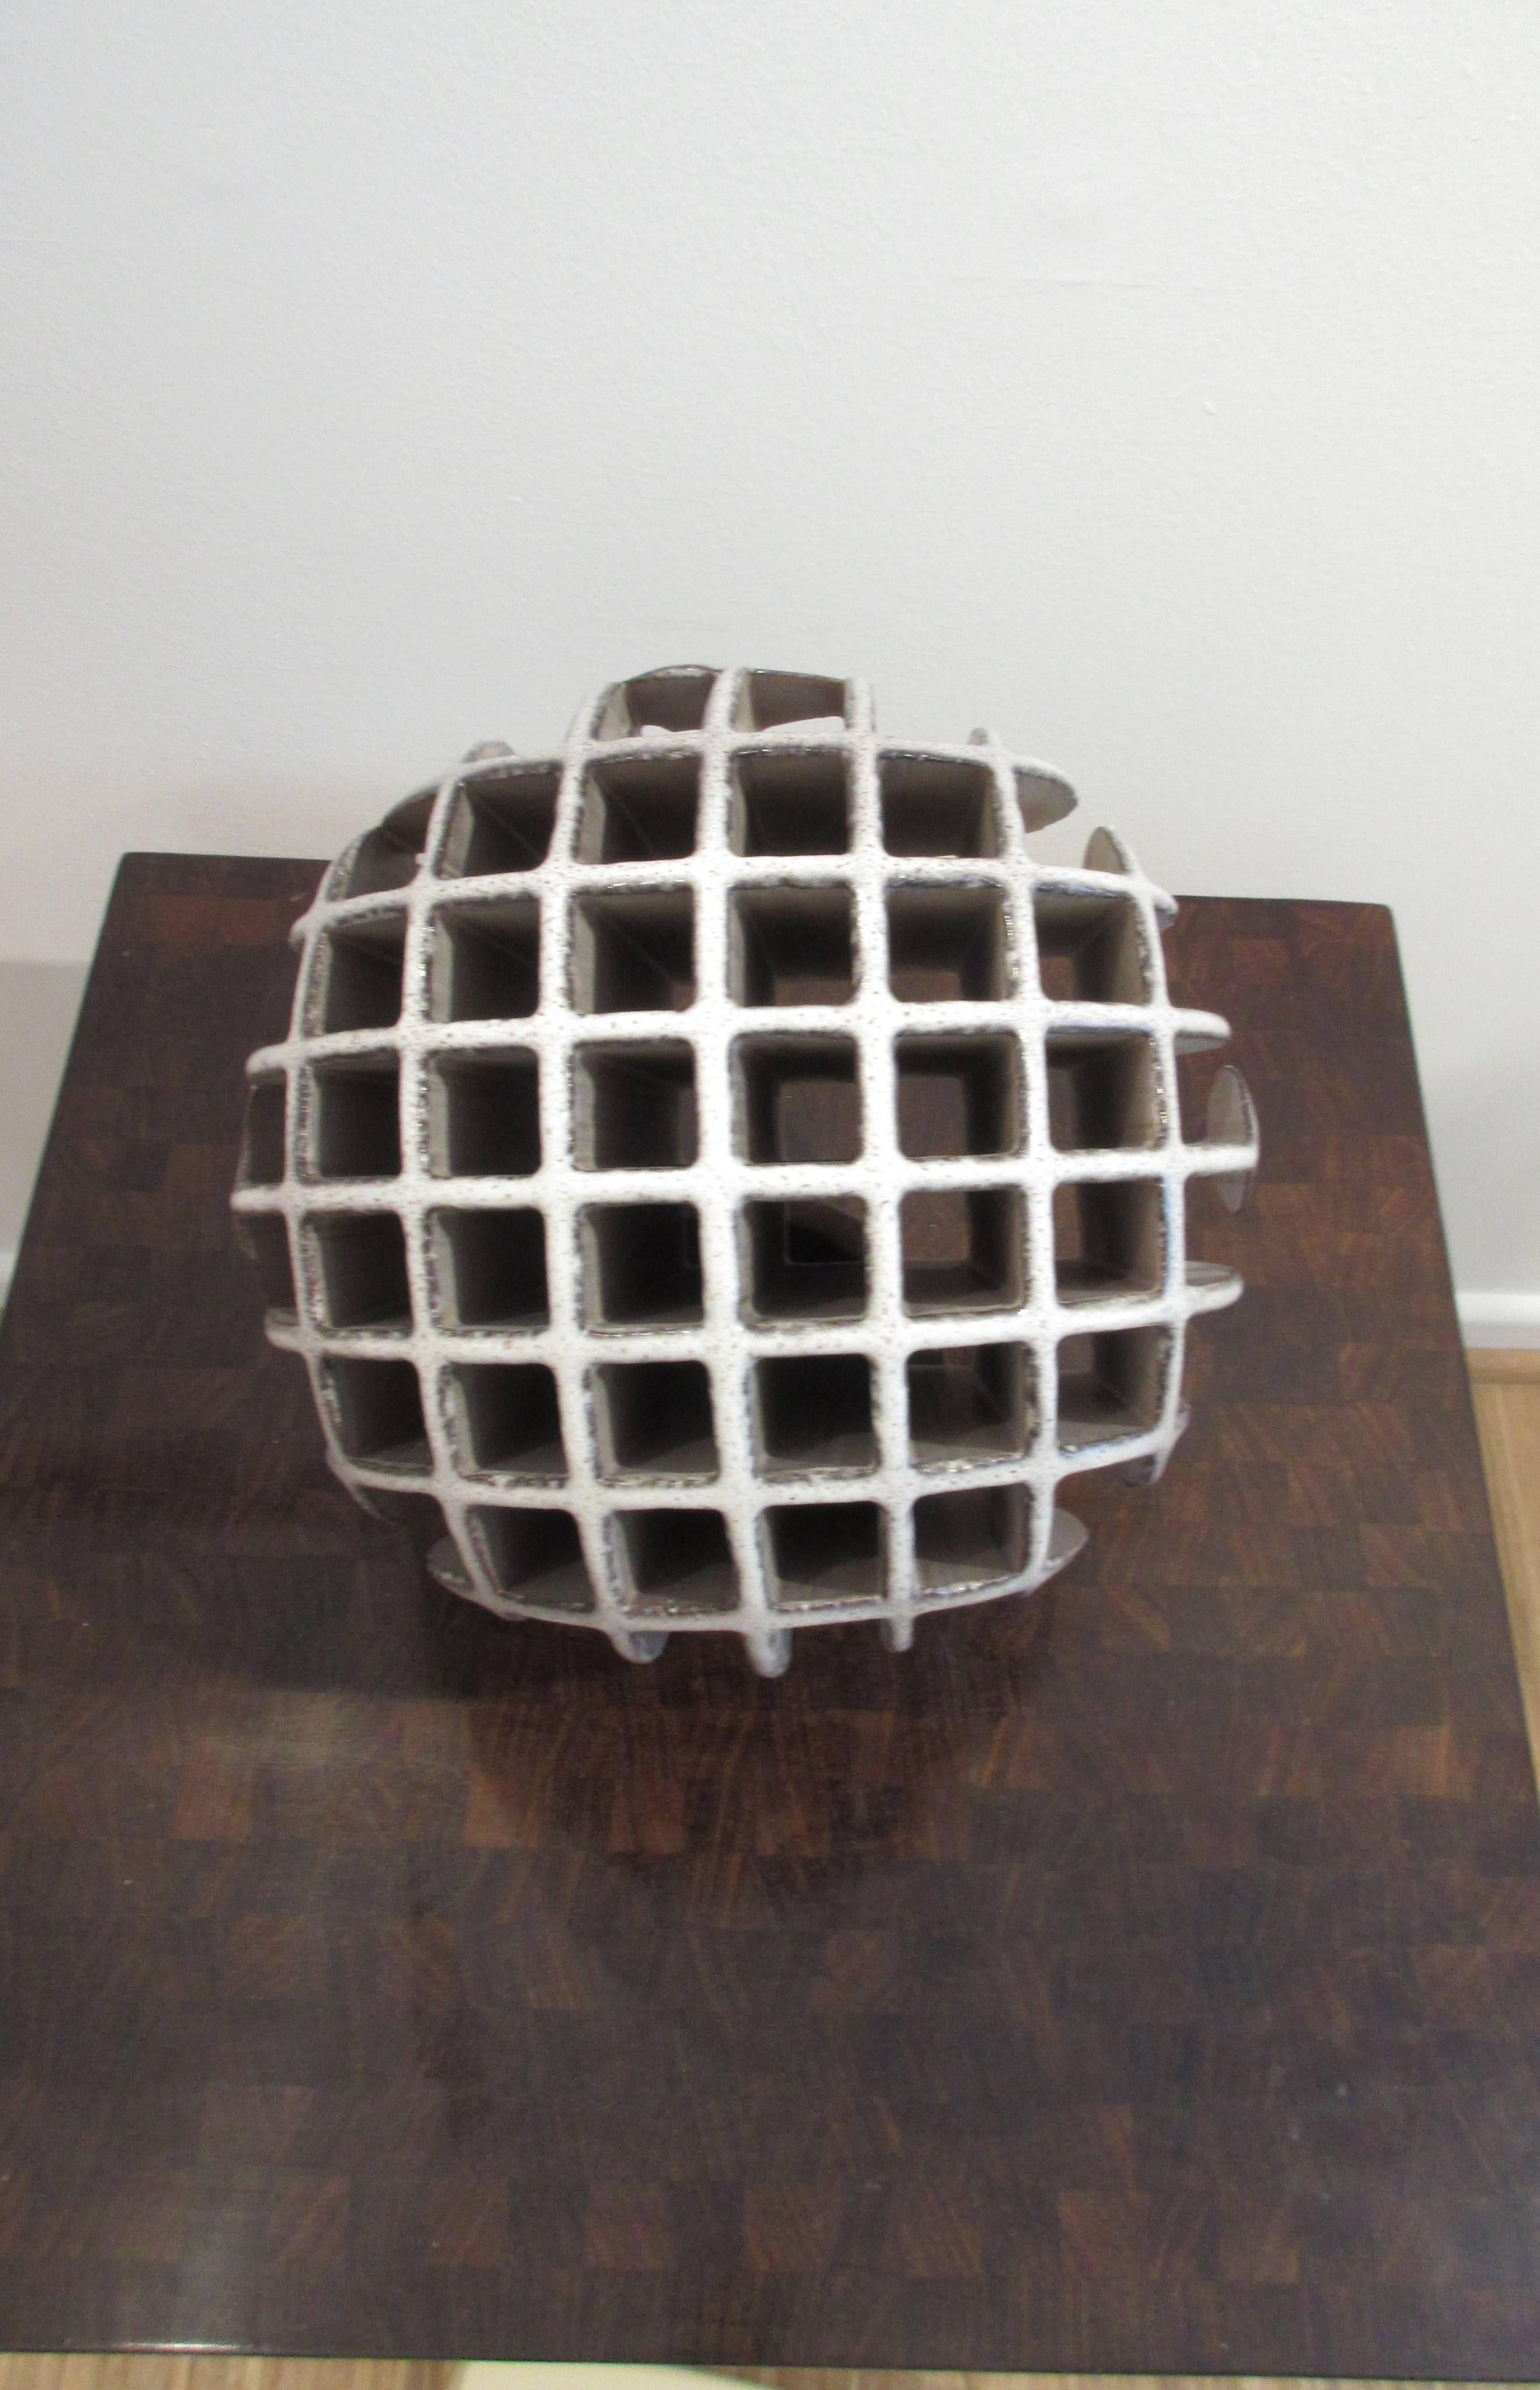 Sphere sculpture by Alessio Tasca (born in 1929). Captivating contrast of open and solid form can be rotated on separate ring base. Signed with mark, early 1970.
Measures:
Height 24.5 cm (28 cm with ring).

Diameter 24 cm.

